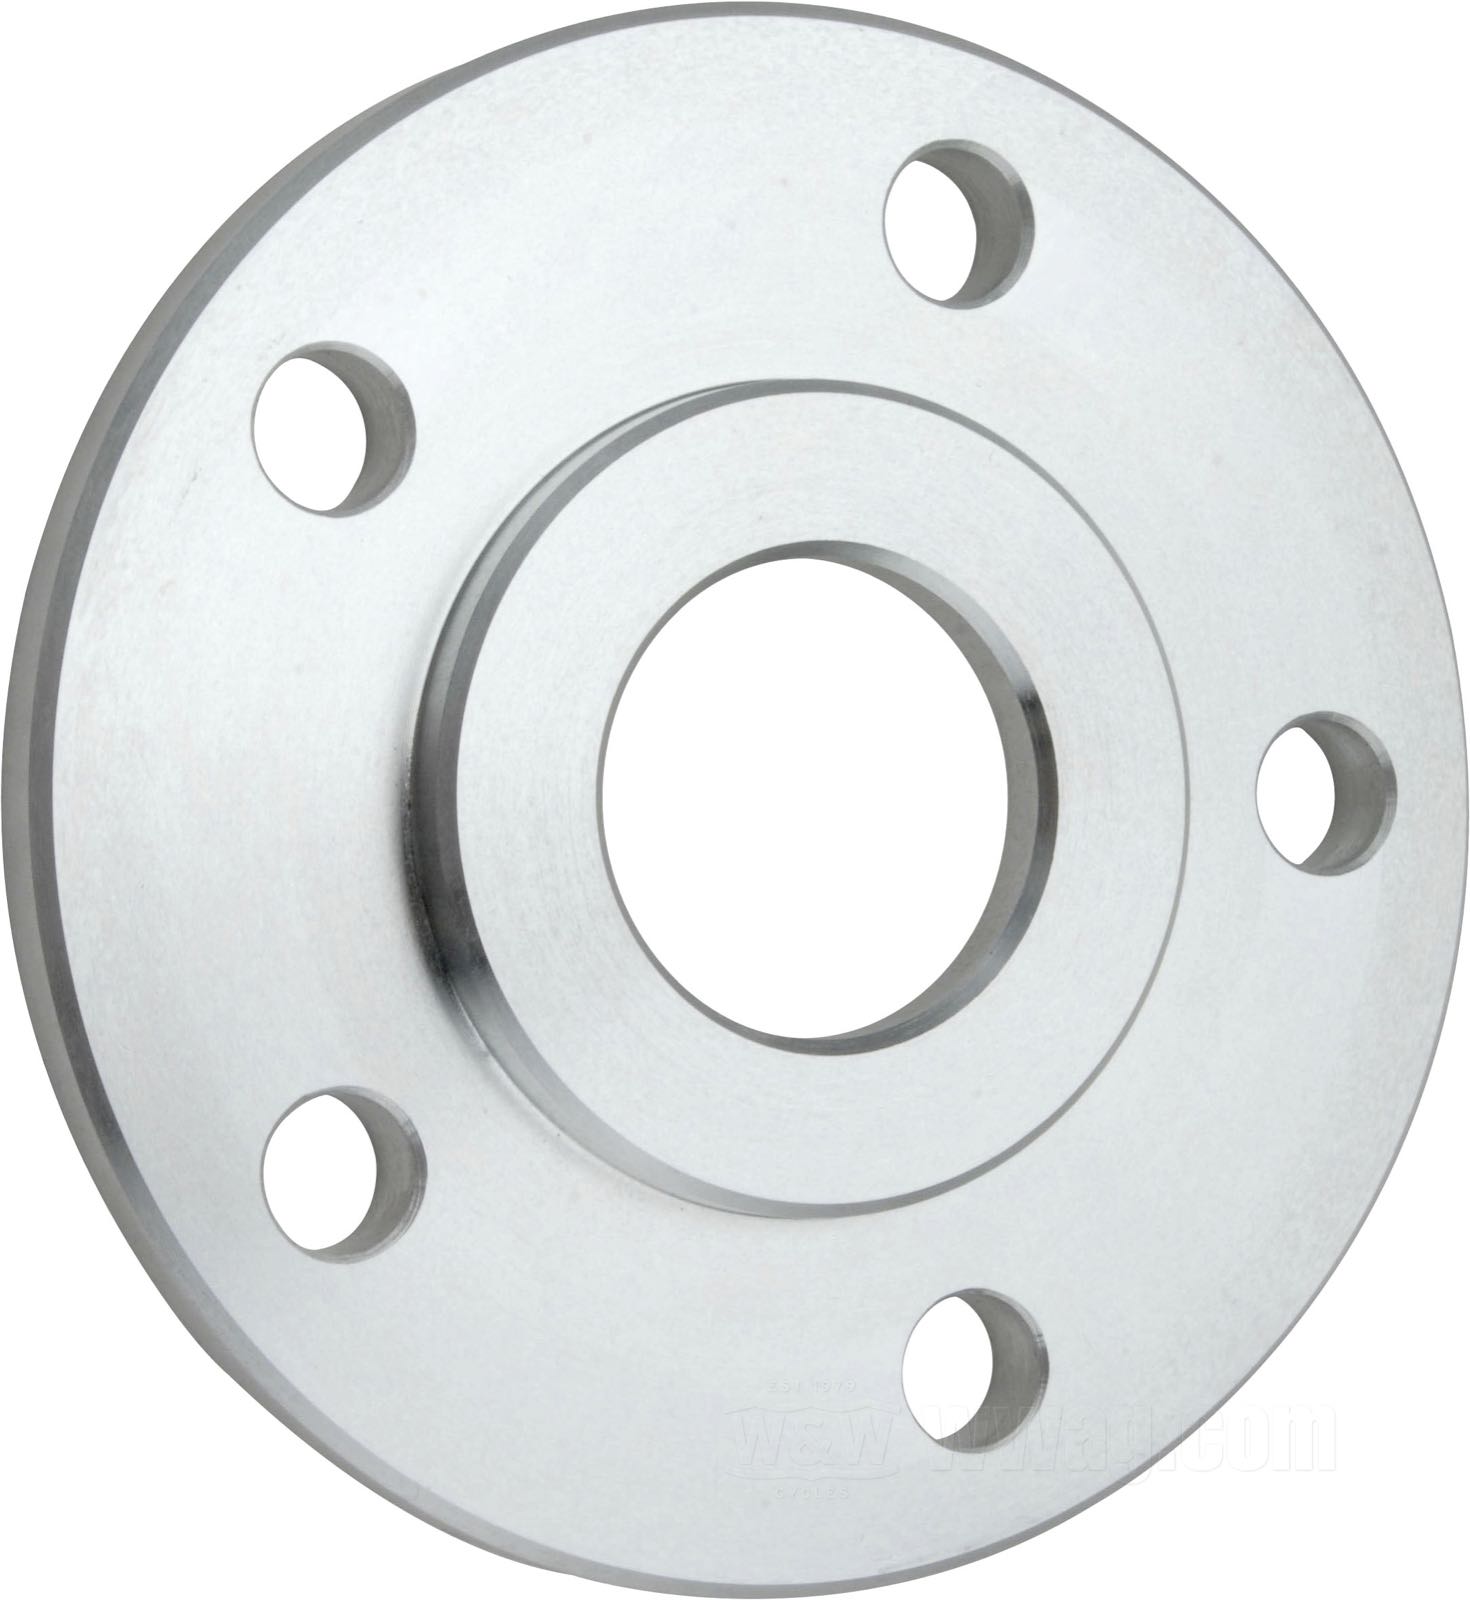 CPV, pulley spacer 1/4 offset (7/16 holes)